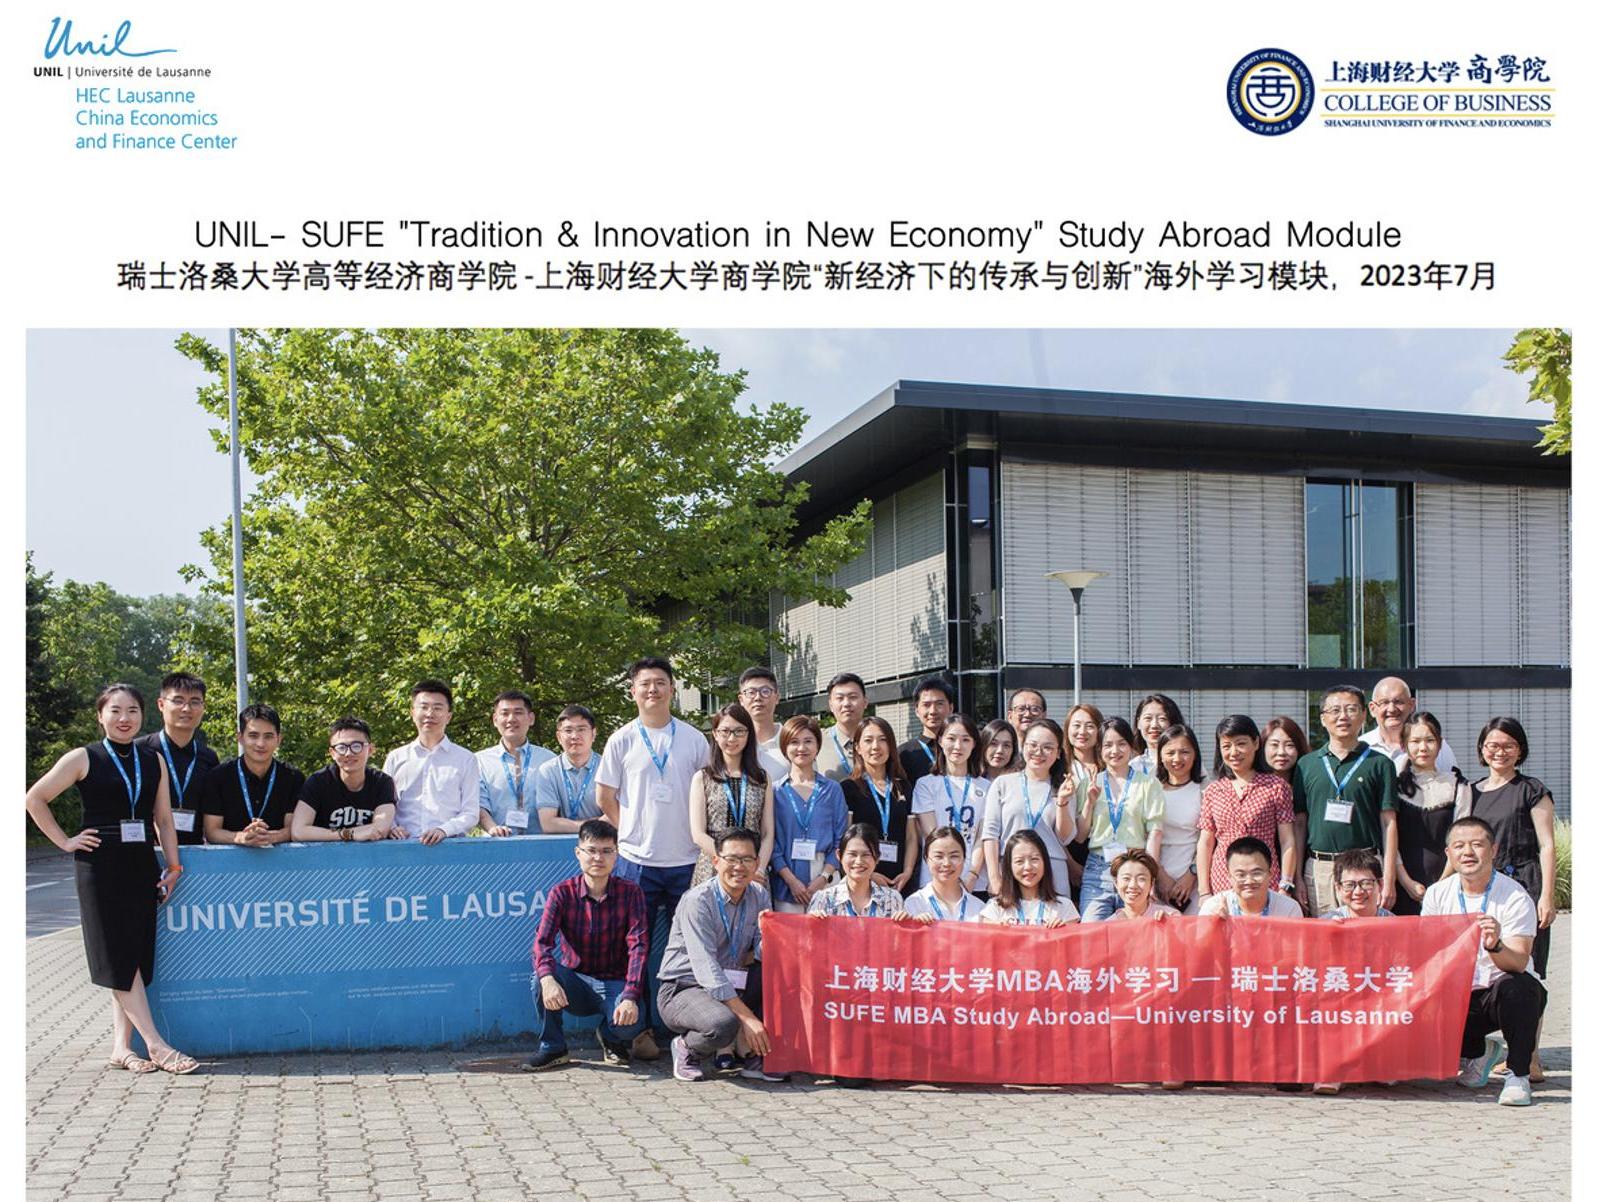  "Tradition & Innovation in New Economy" Study Abroad Module (Switzerland) of SUFE on the Campus of UNIL